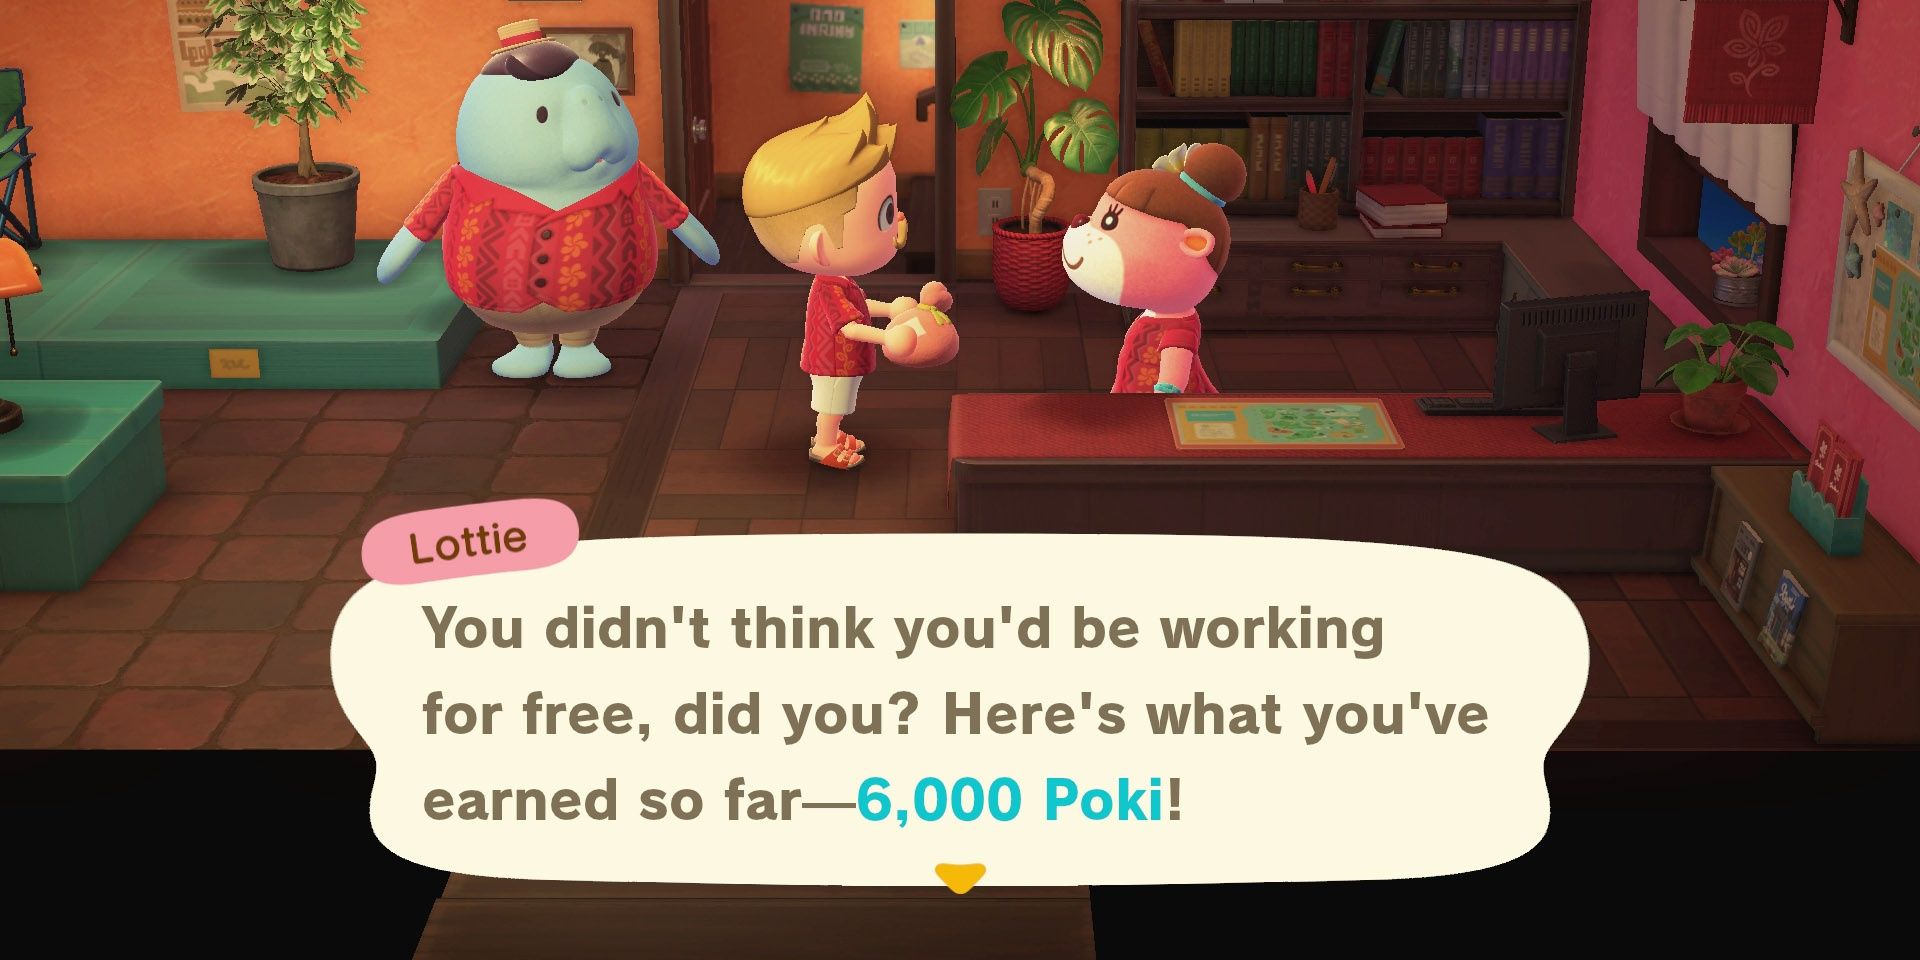 Earning payment from Lottie in Animal Crossing Happy Home Paradise